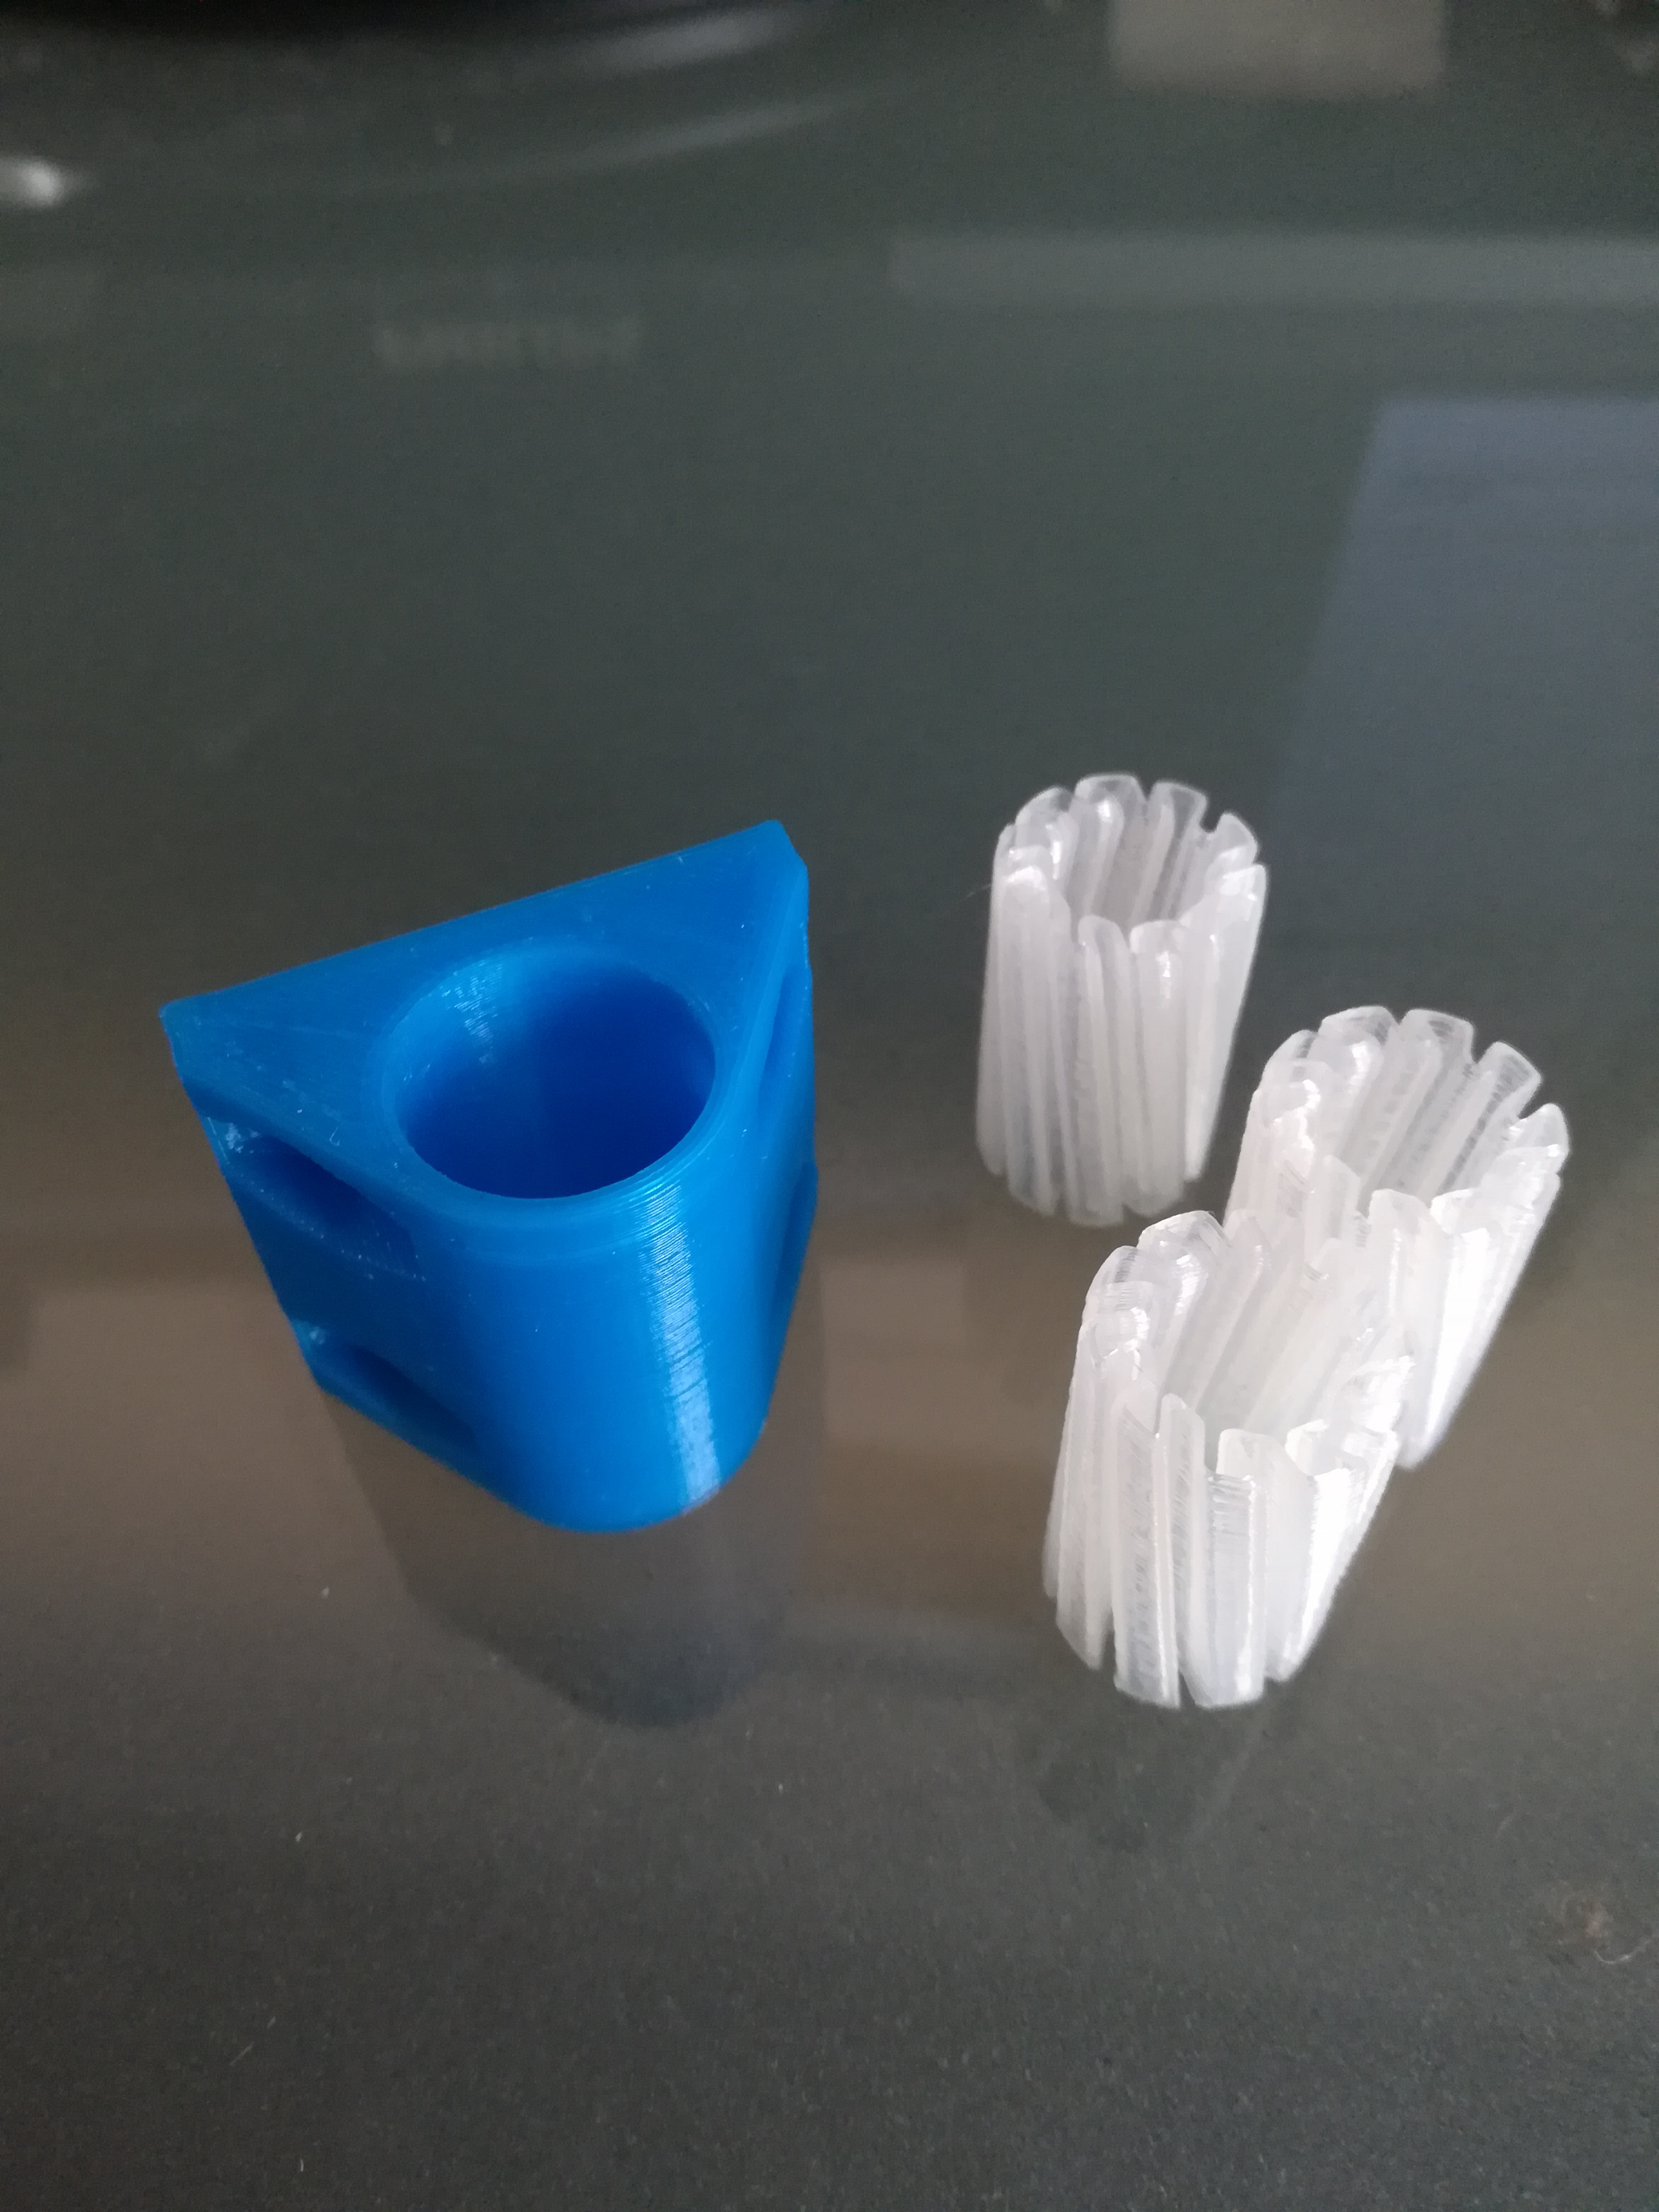 23 Recommended 3d Printed Vase 2024 free download 3d printed vase of anet a8 spiral vase linear bushing by artmanlinux intended for original